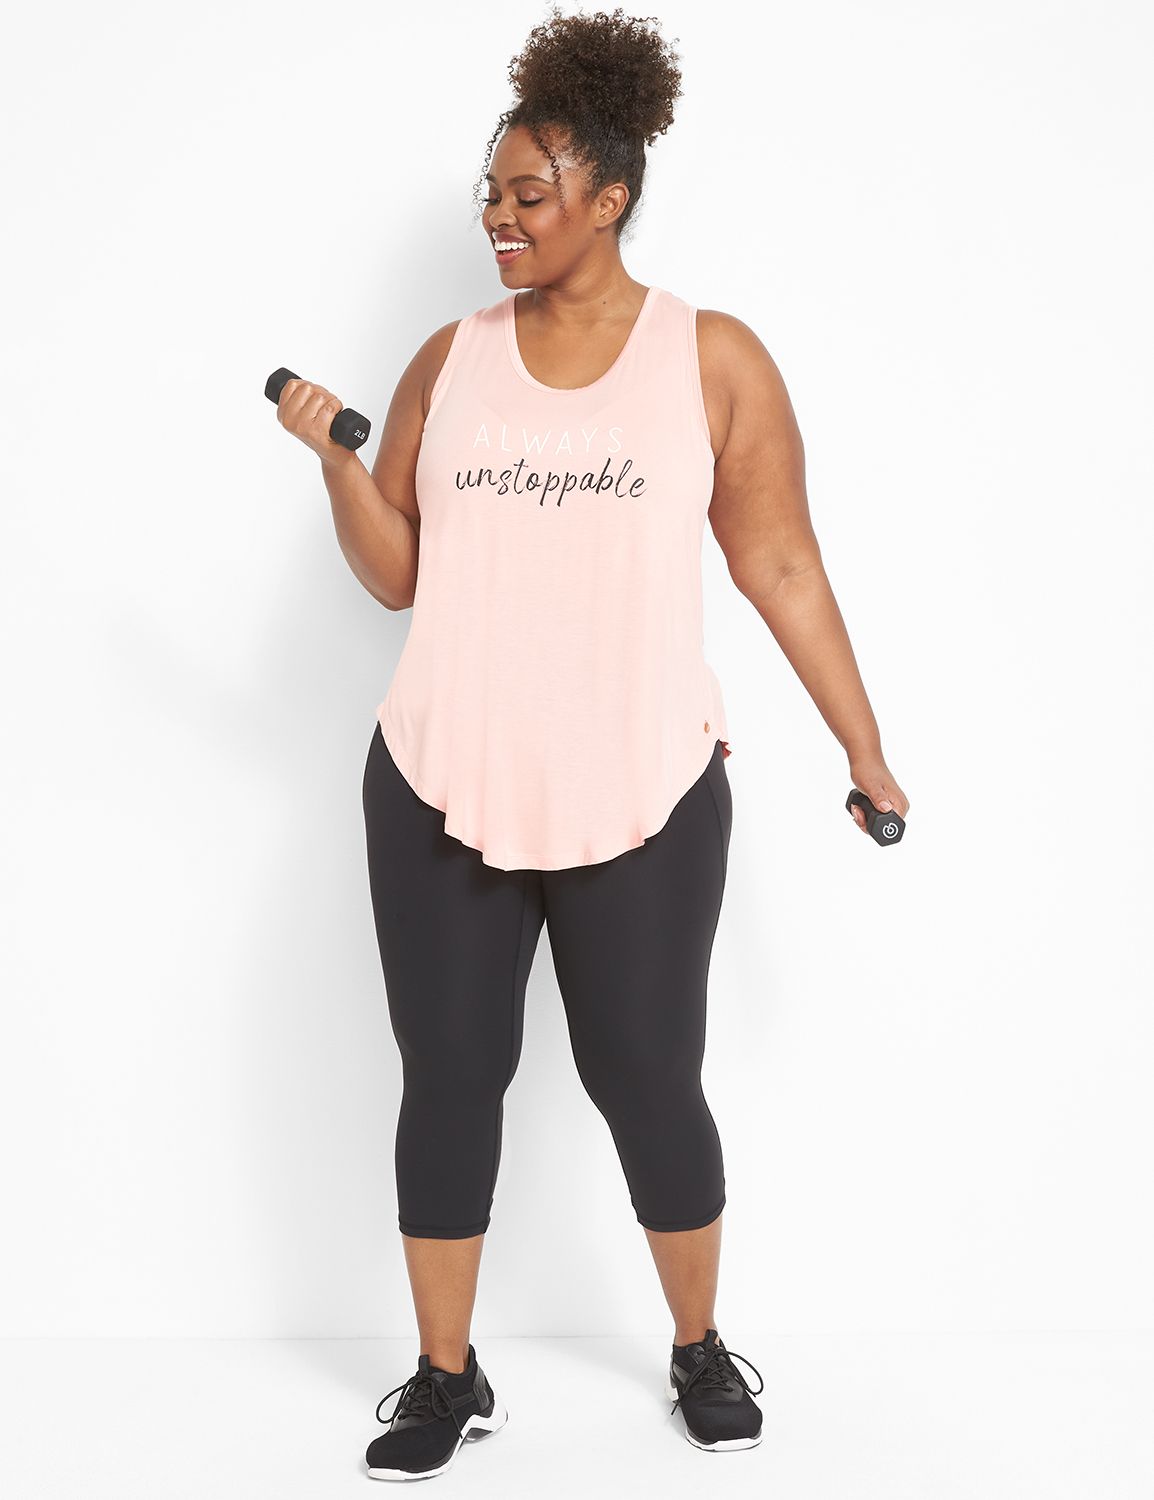 The unstoppable Lace Back Tank, Sports Bra, Spandex Shorts, and